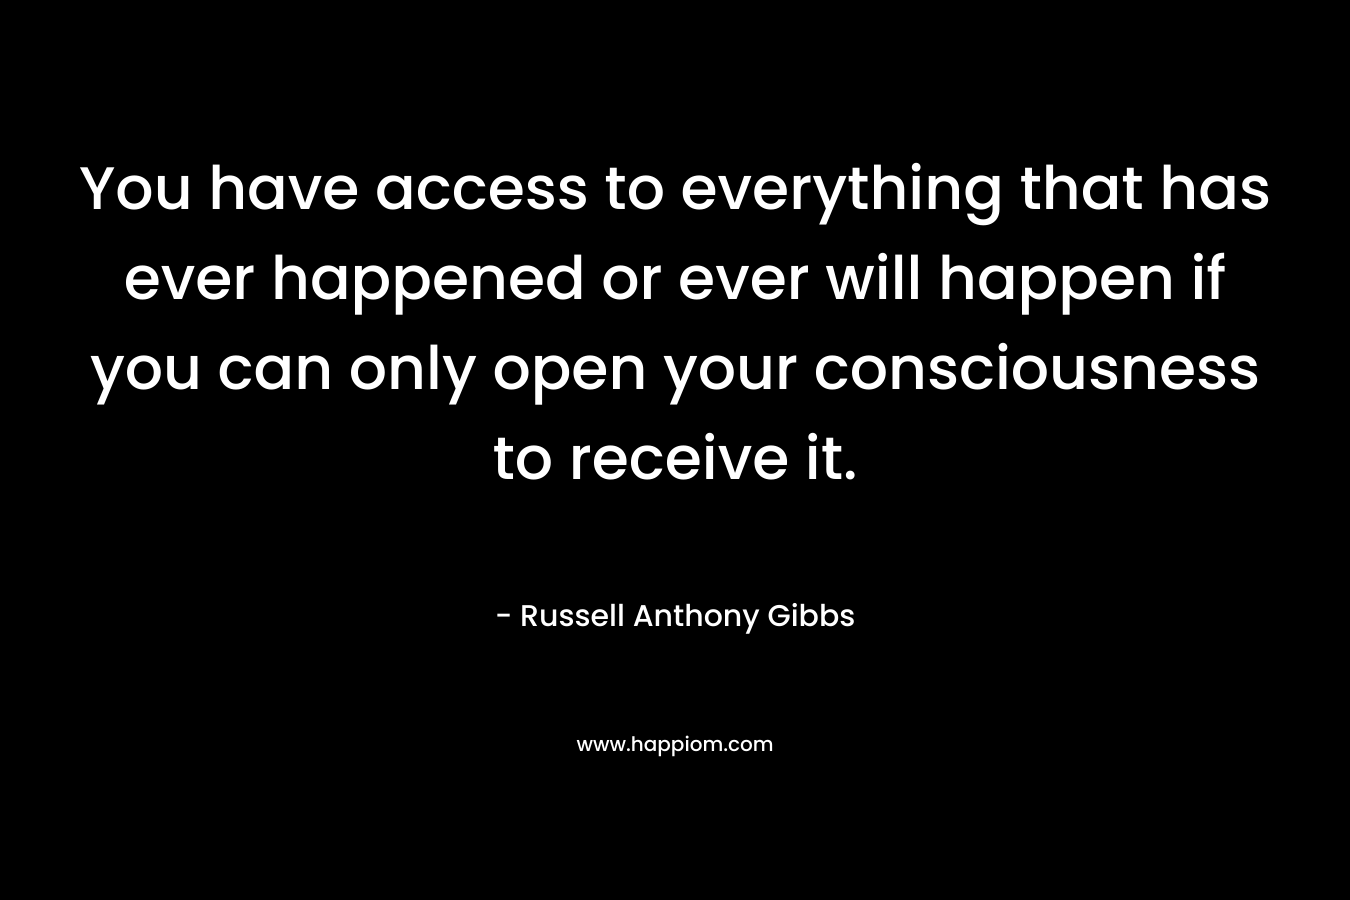 You have access to everything that has ever happened or ever will happen if you can only open your consciousness to receive it. – Russell Anthony Gibbs